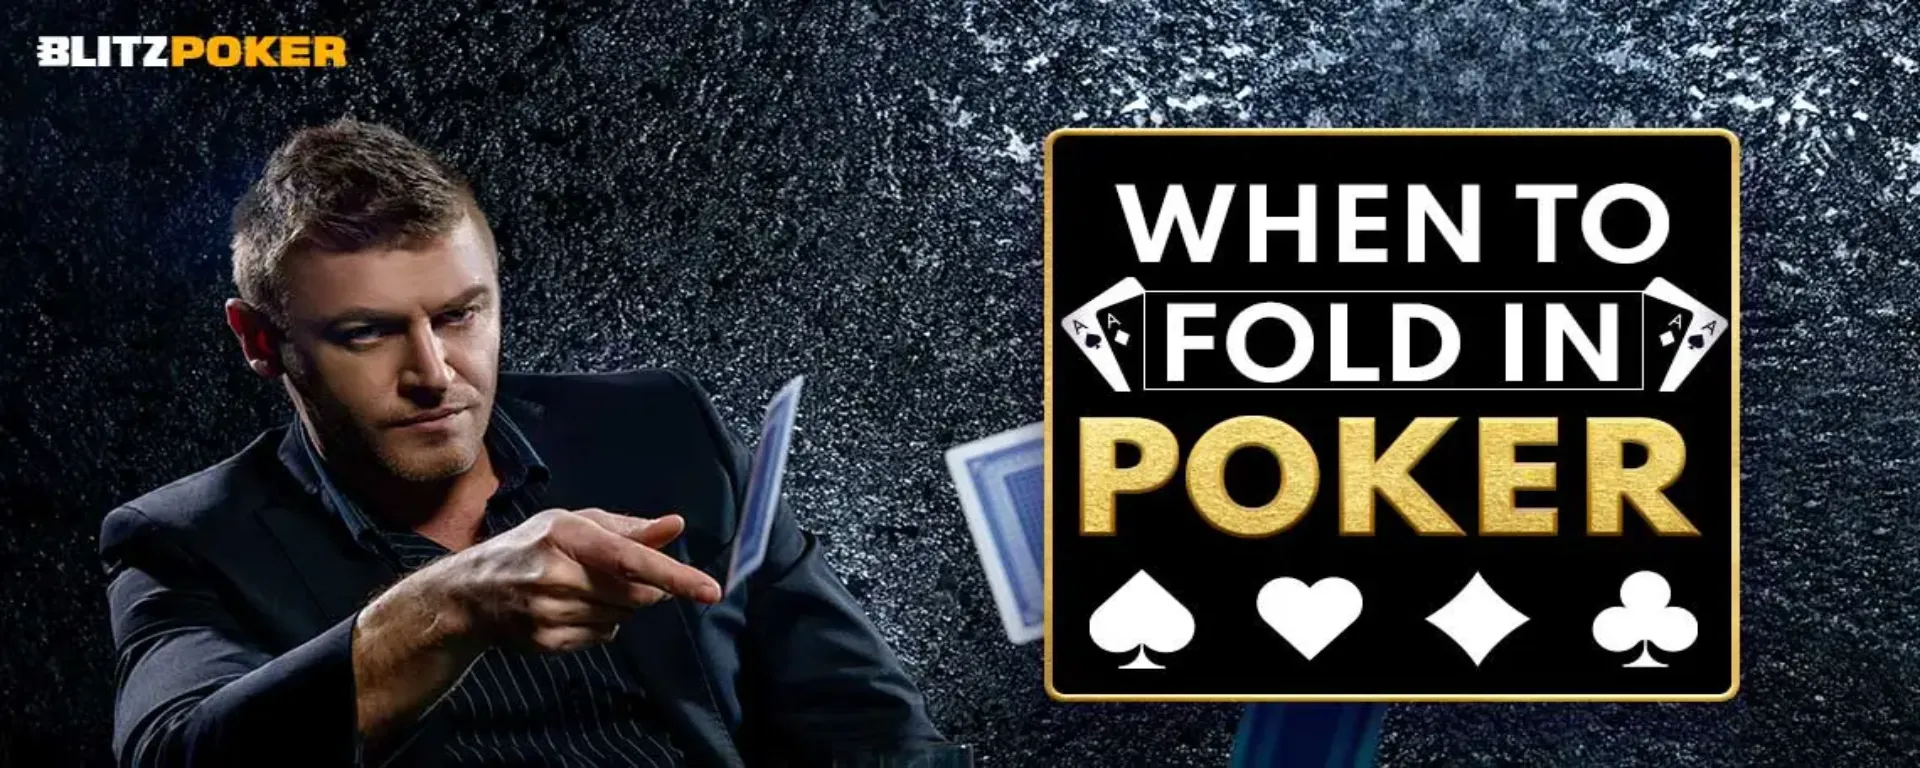 When to Fold in Poker: Folding At The Right Time